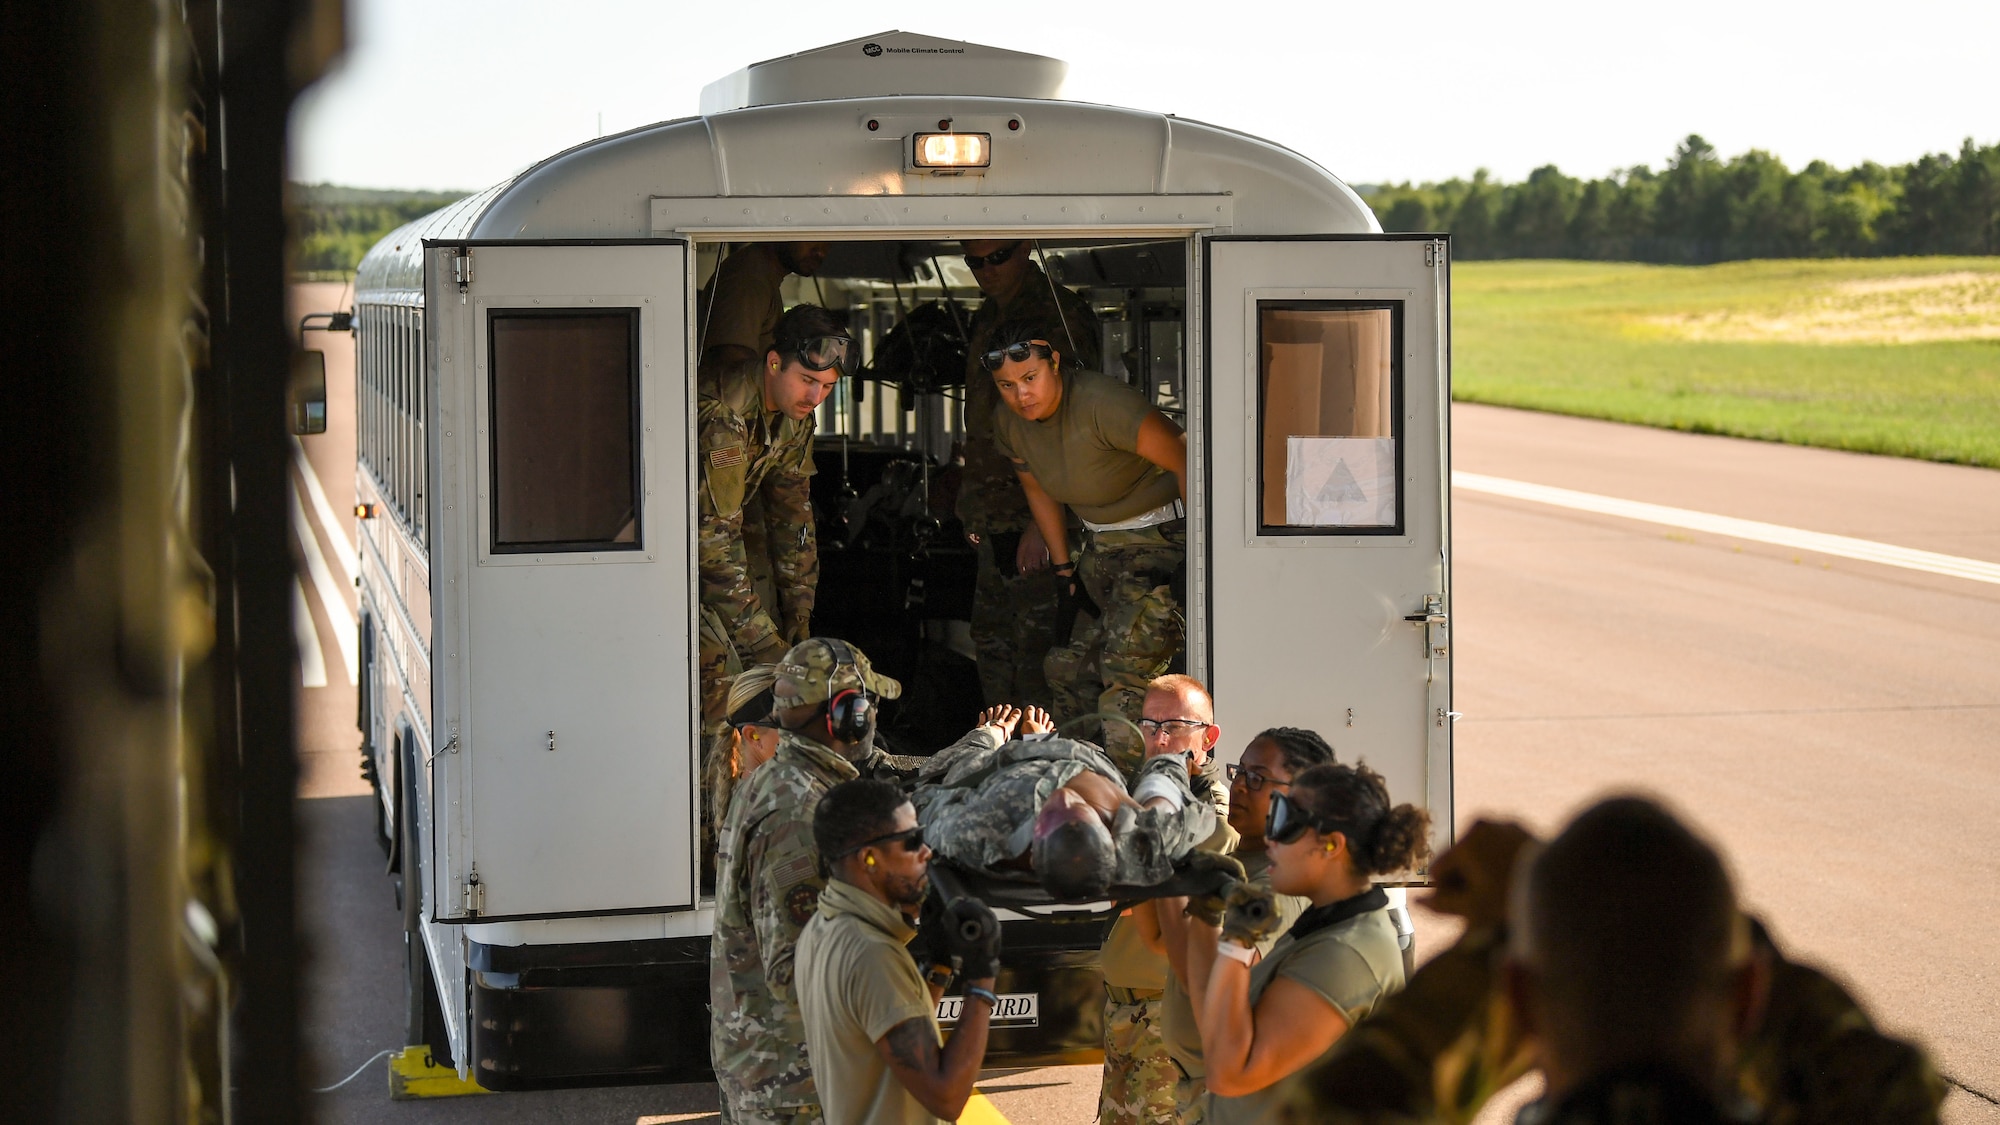 U.S. Airmen offload a C-130J Super Hercules aircraft assigned to the 815th Airlift Squadron, Keesler Air Force Base, Mississippi, for aeromedical evacuation training during exercise Patriot Warrior at Fort McCoy, Wisconsin, Aug. 13, 2021. Patriot Warrior is Air Force Reserve Command's premier exercise providing Airmen an opportunity to train with joint and international partners in airlift, aeromedical evacuation, and mobility support. The exercise builds on capabilities for the future fight, increasing the readiness, lethality and agility of the Air Force Reserve. (U.S. Air Force Photo by Tech. Sgt. Corban Lundborg)